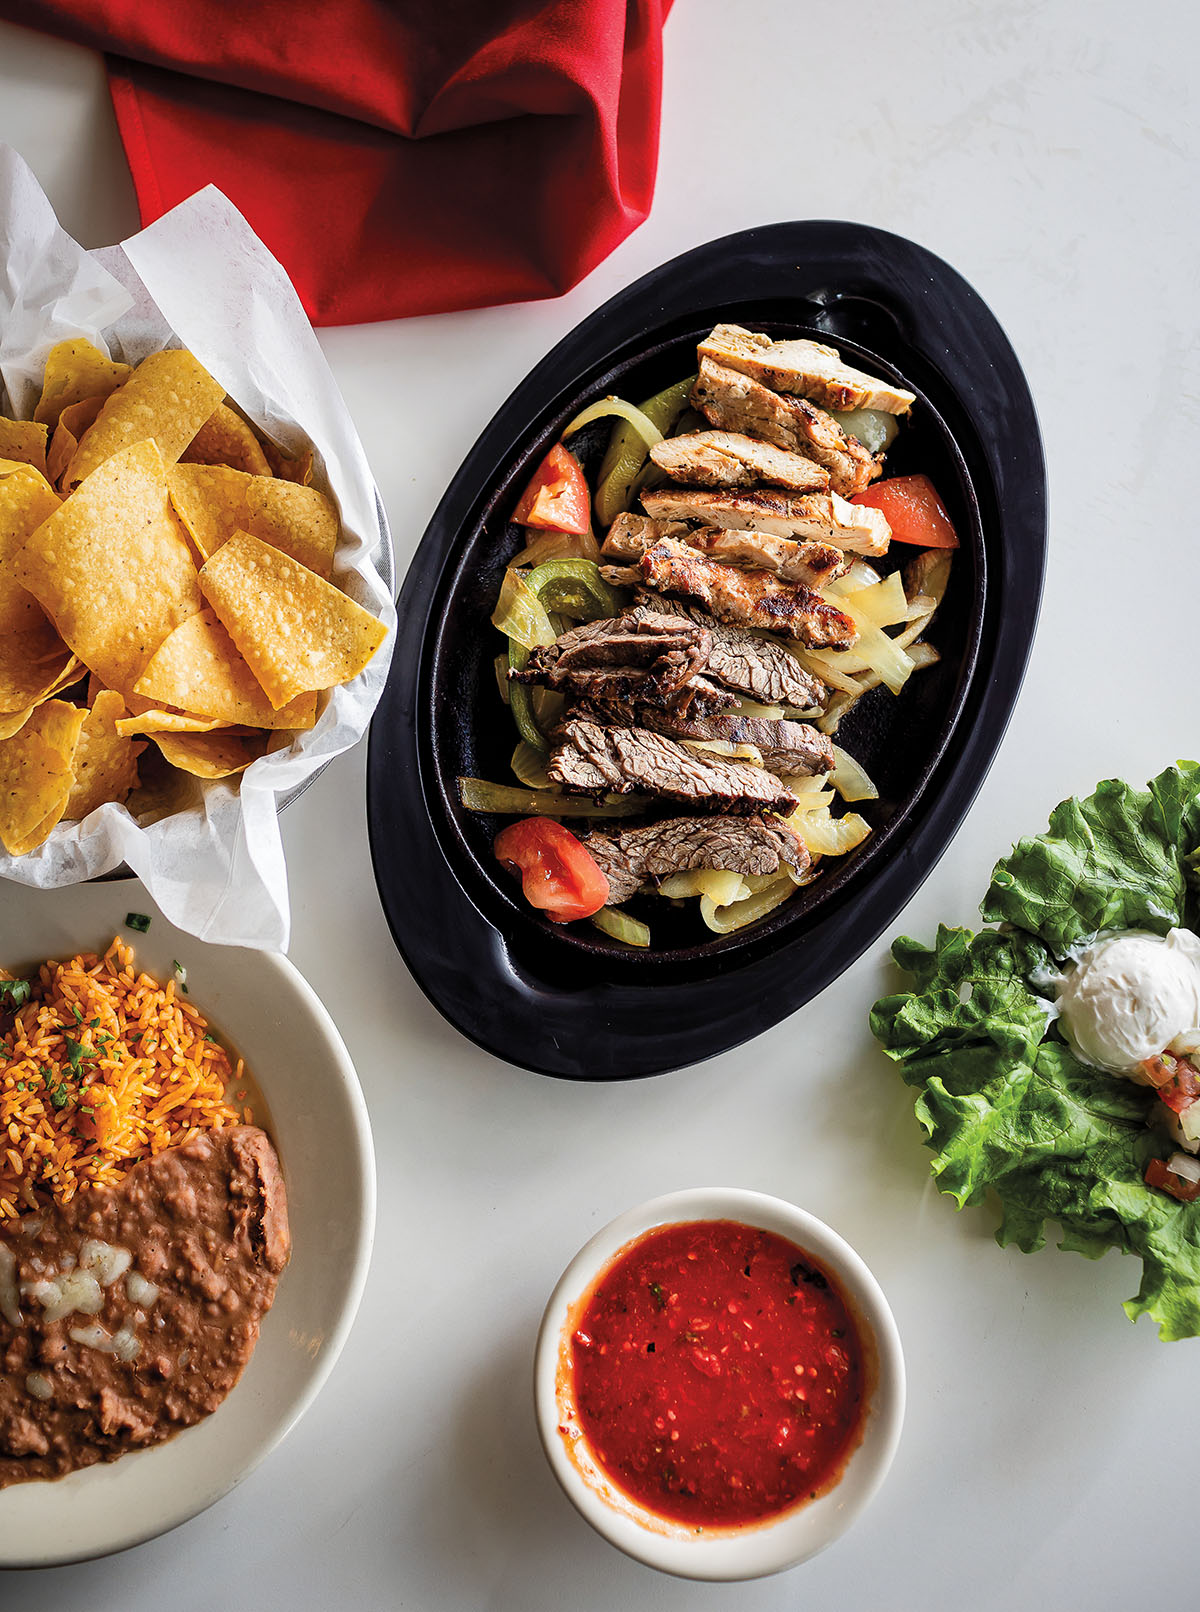 An overhead view of platters of fajitas, chips, salsa, and more